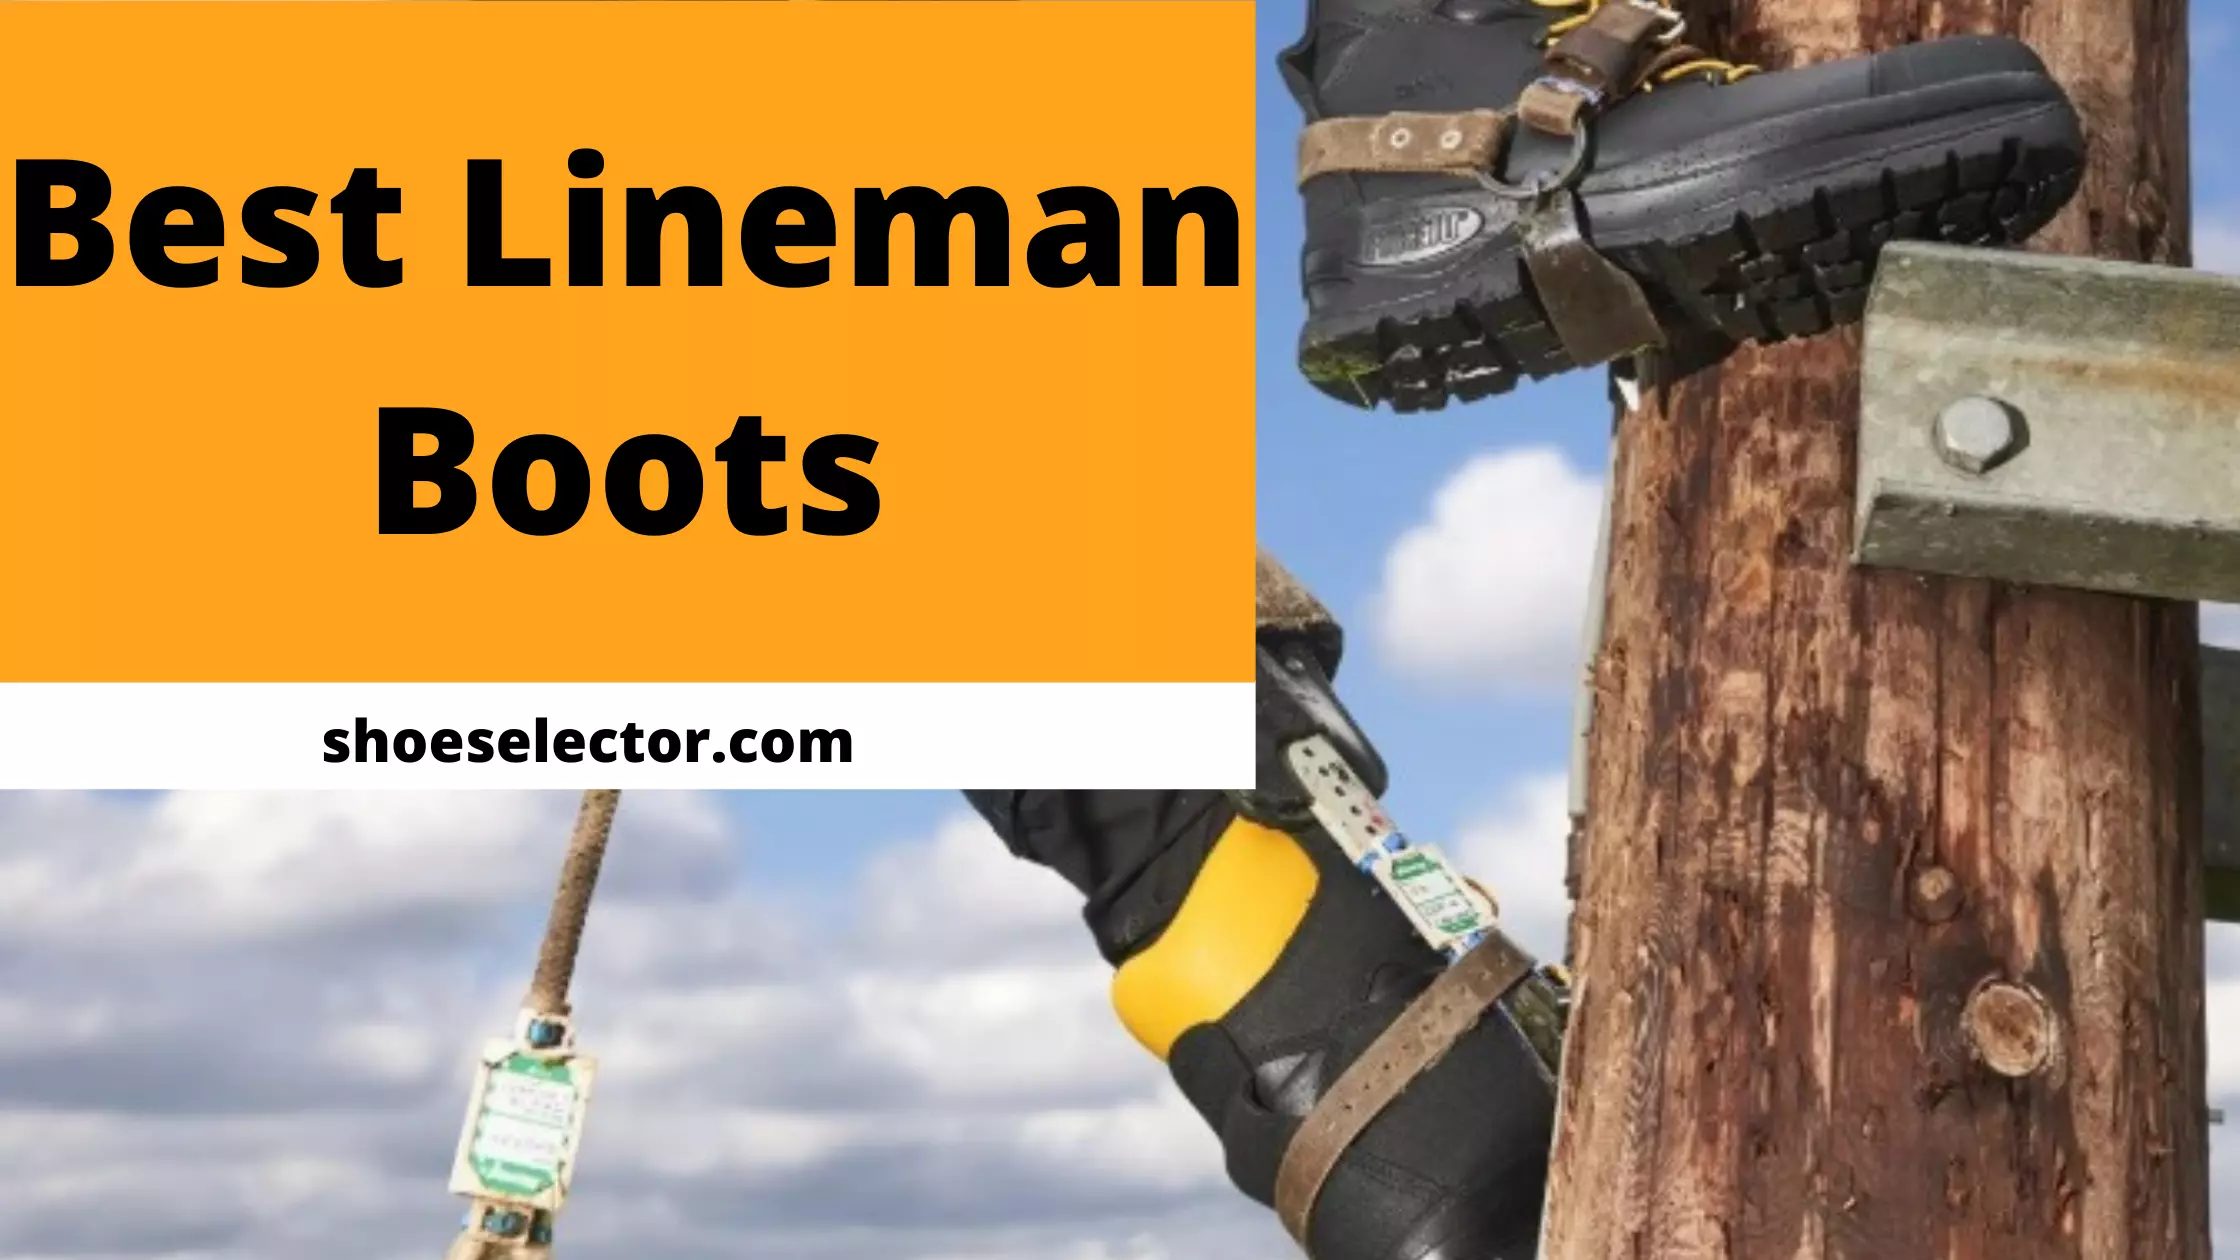 Best Lineman Boots With Products Comparison